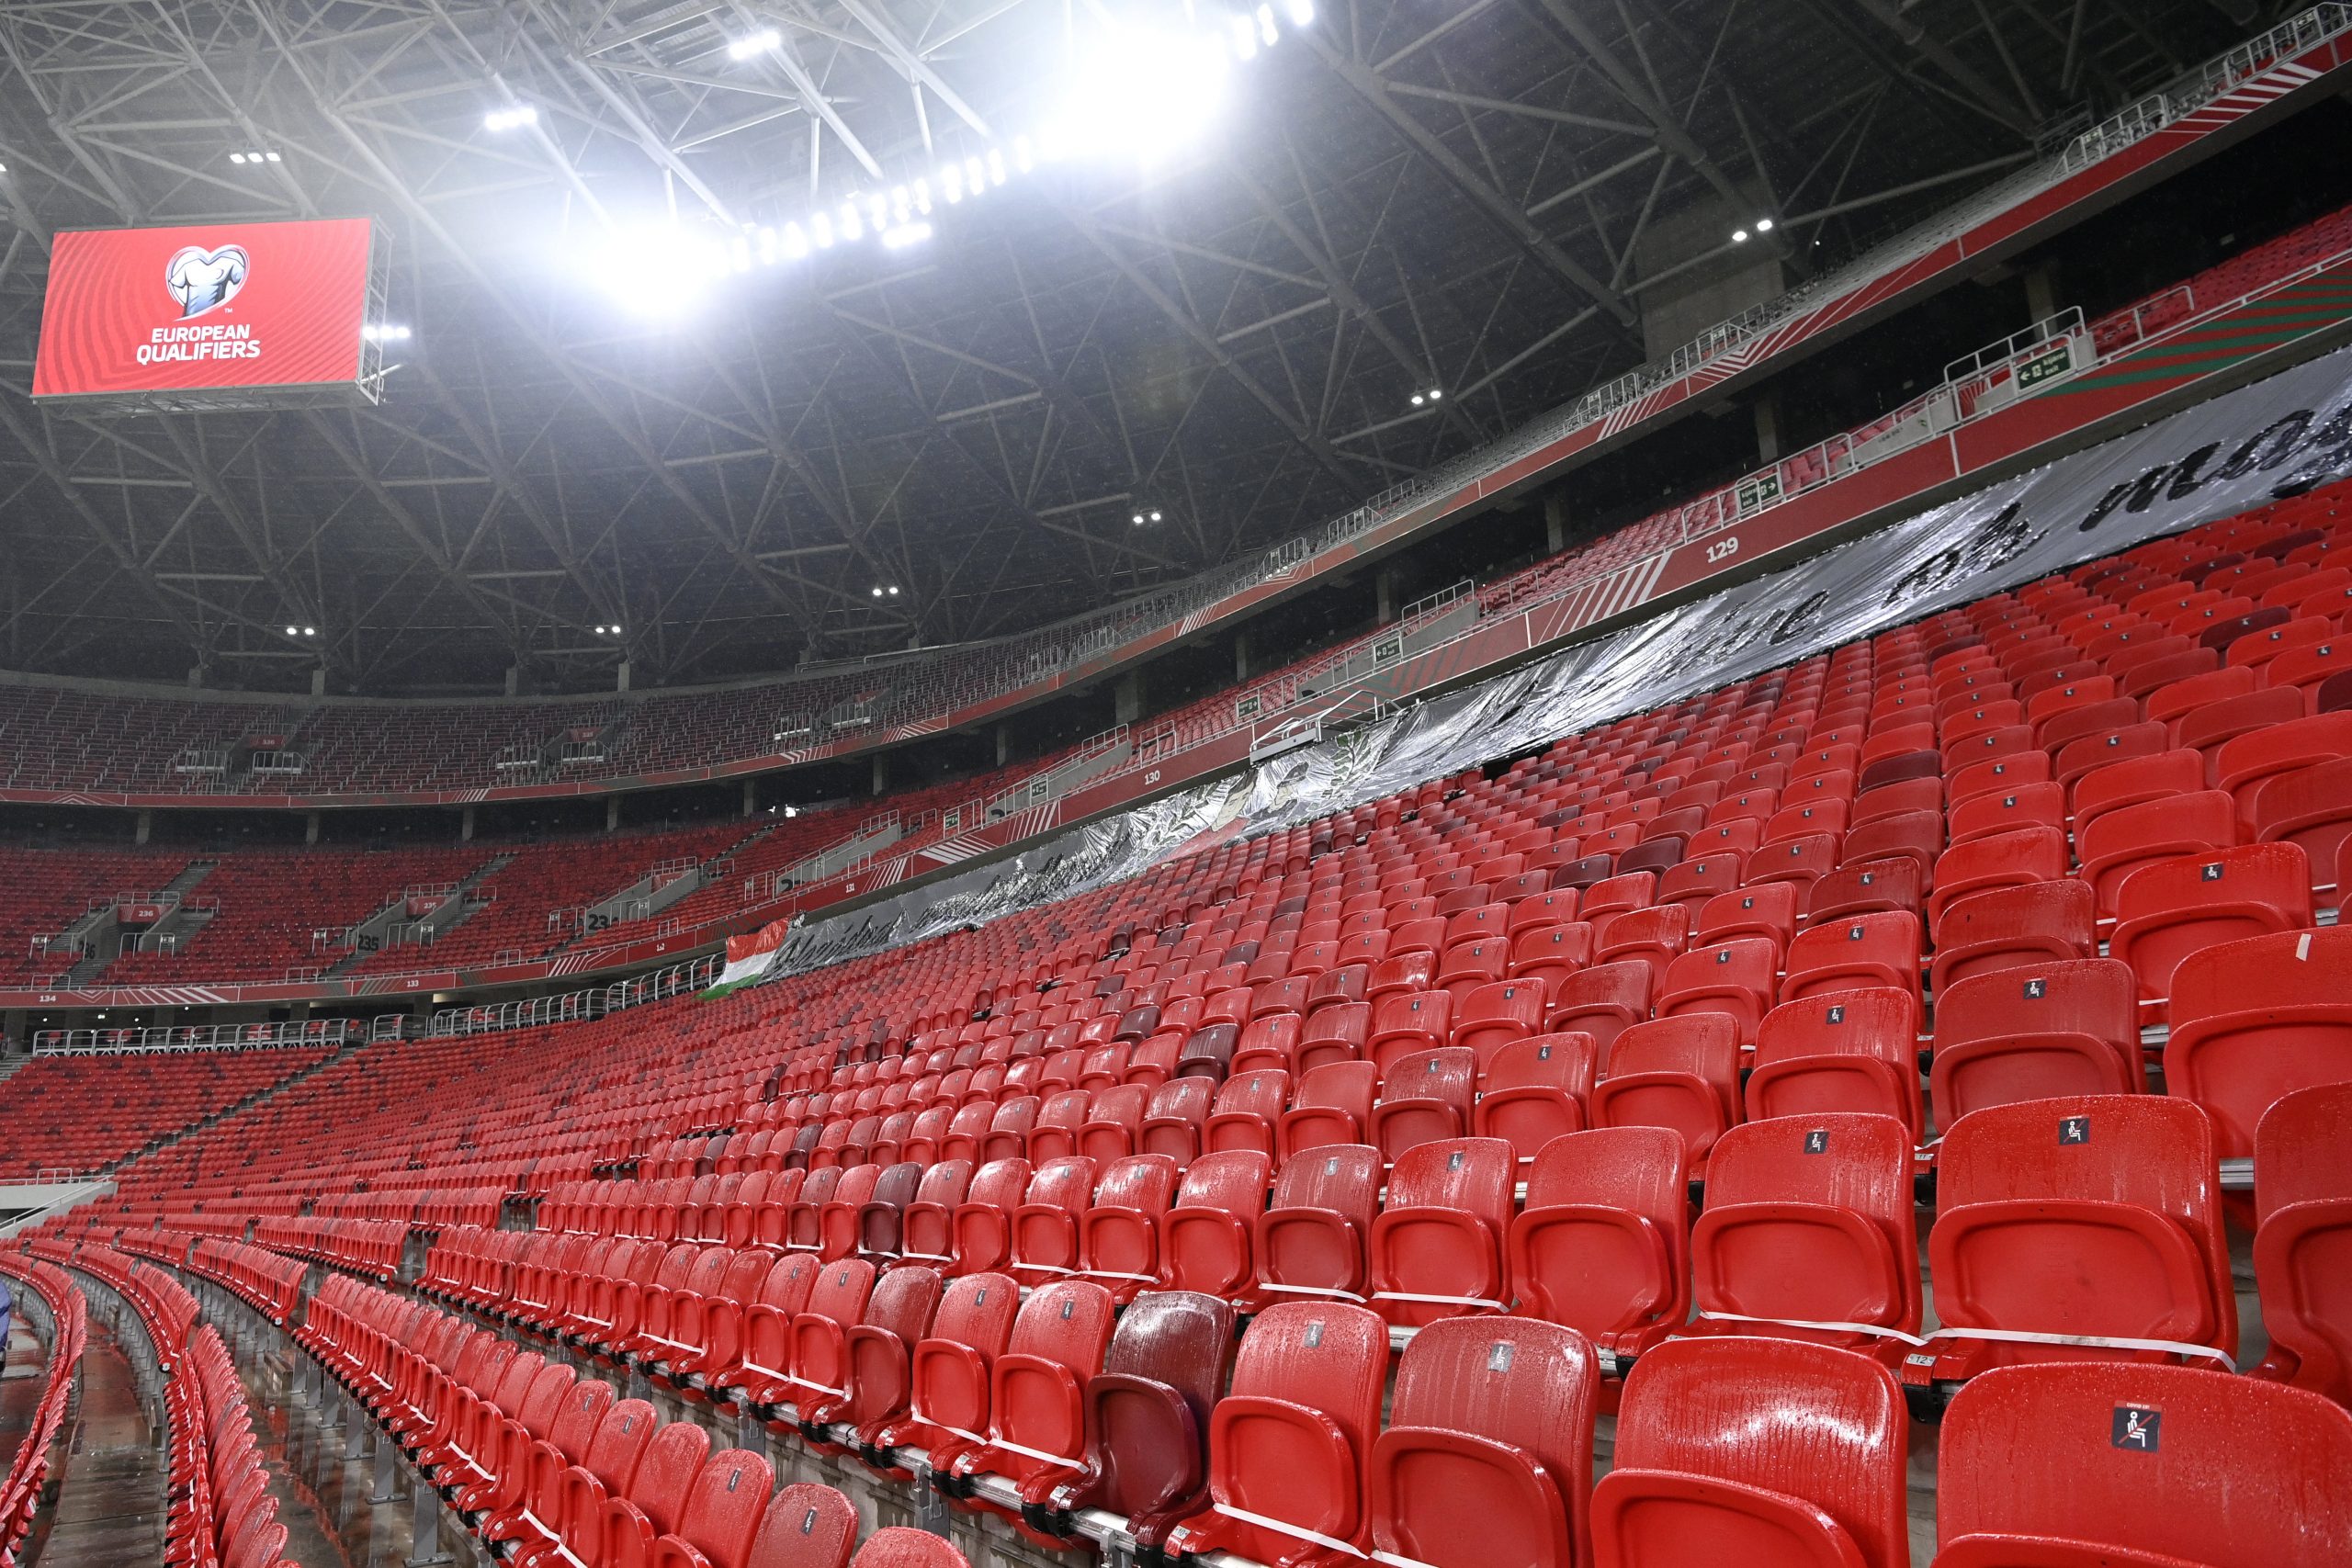 Gov't: Hungary Ready to Host Champions League Final in New Puskás Arena -  Hungary Today